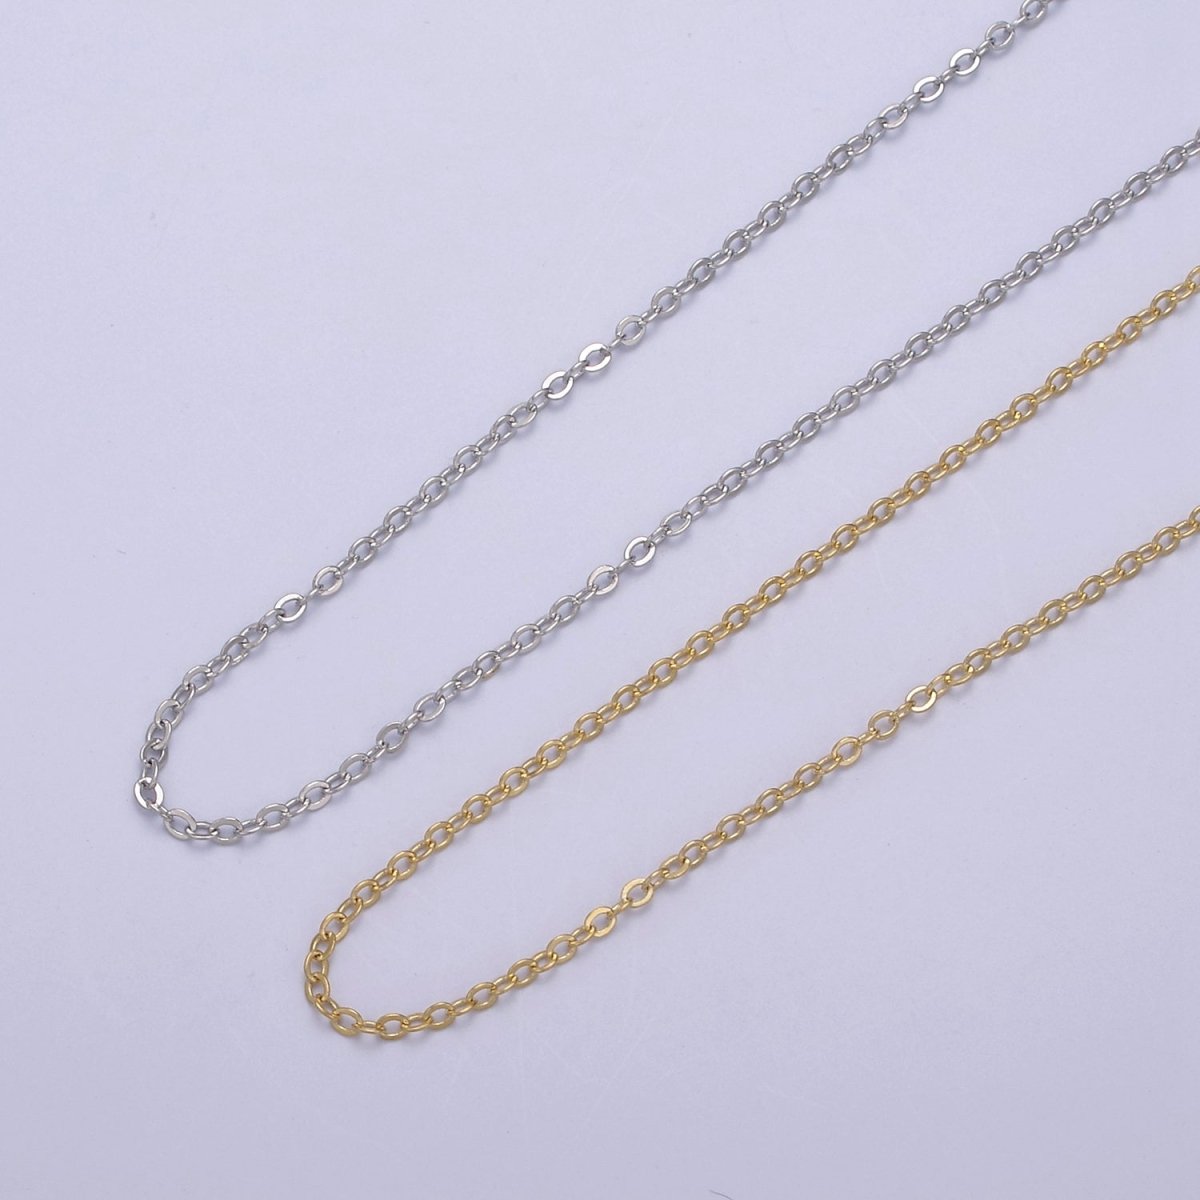 14k Gold Filled Cable Chain Necklace Dainty 1.3 mm Cable Link Chain Jewelry Making Women Necklace 15.5" w/ 2 " extender | WA-721 to WA-724 Clearance Pricing - DLUXCA